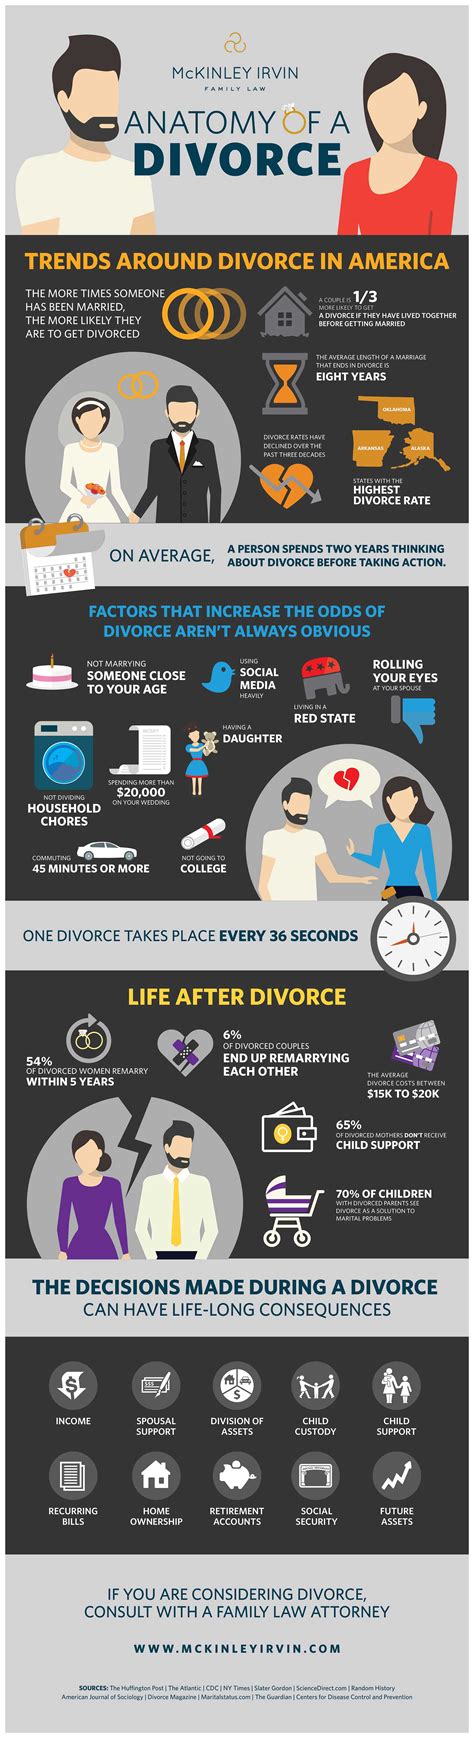 anatomy of a divorce [infographic]